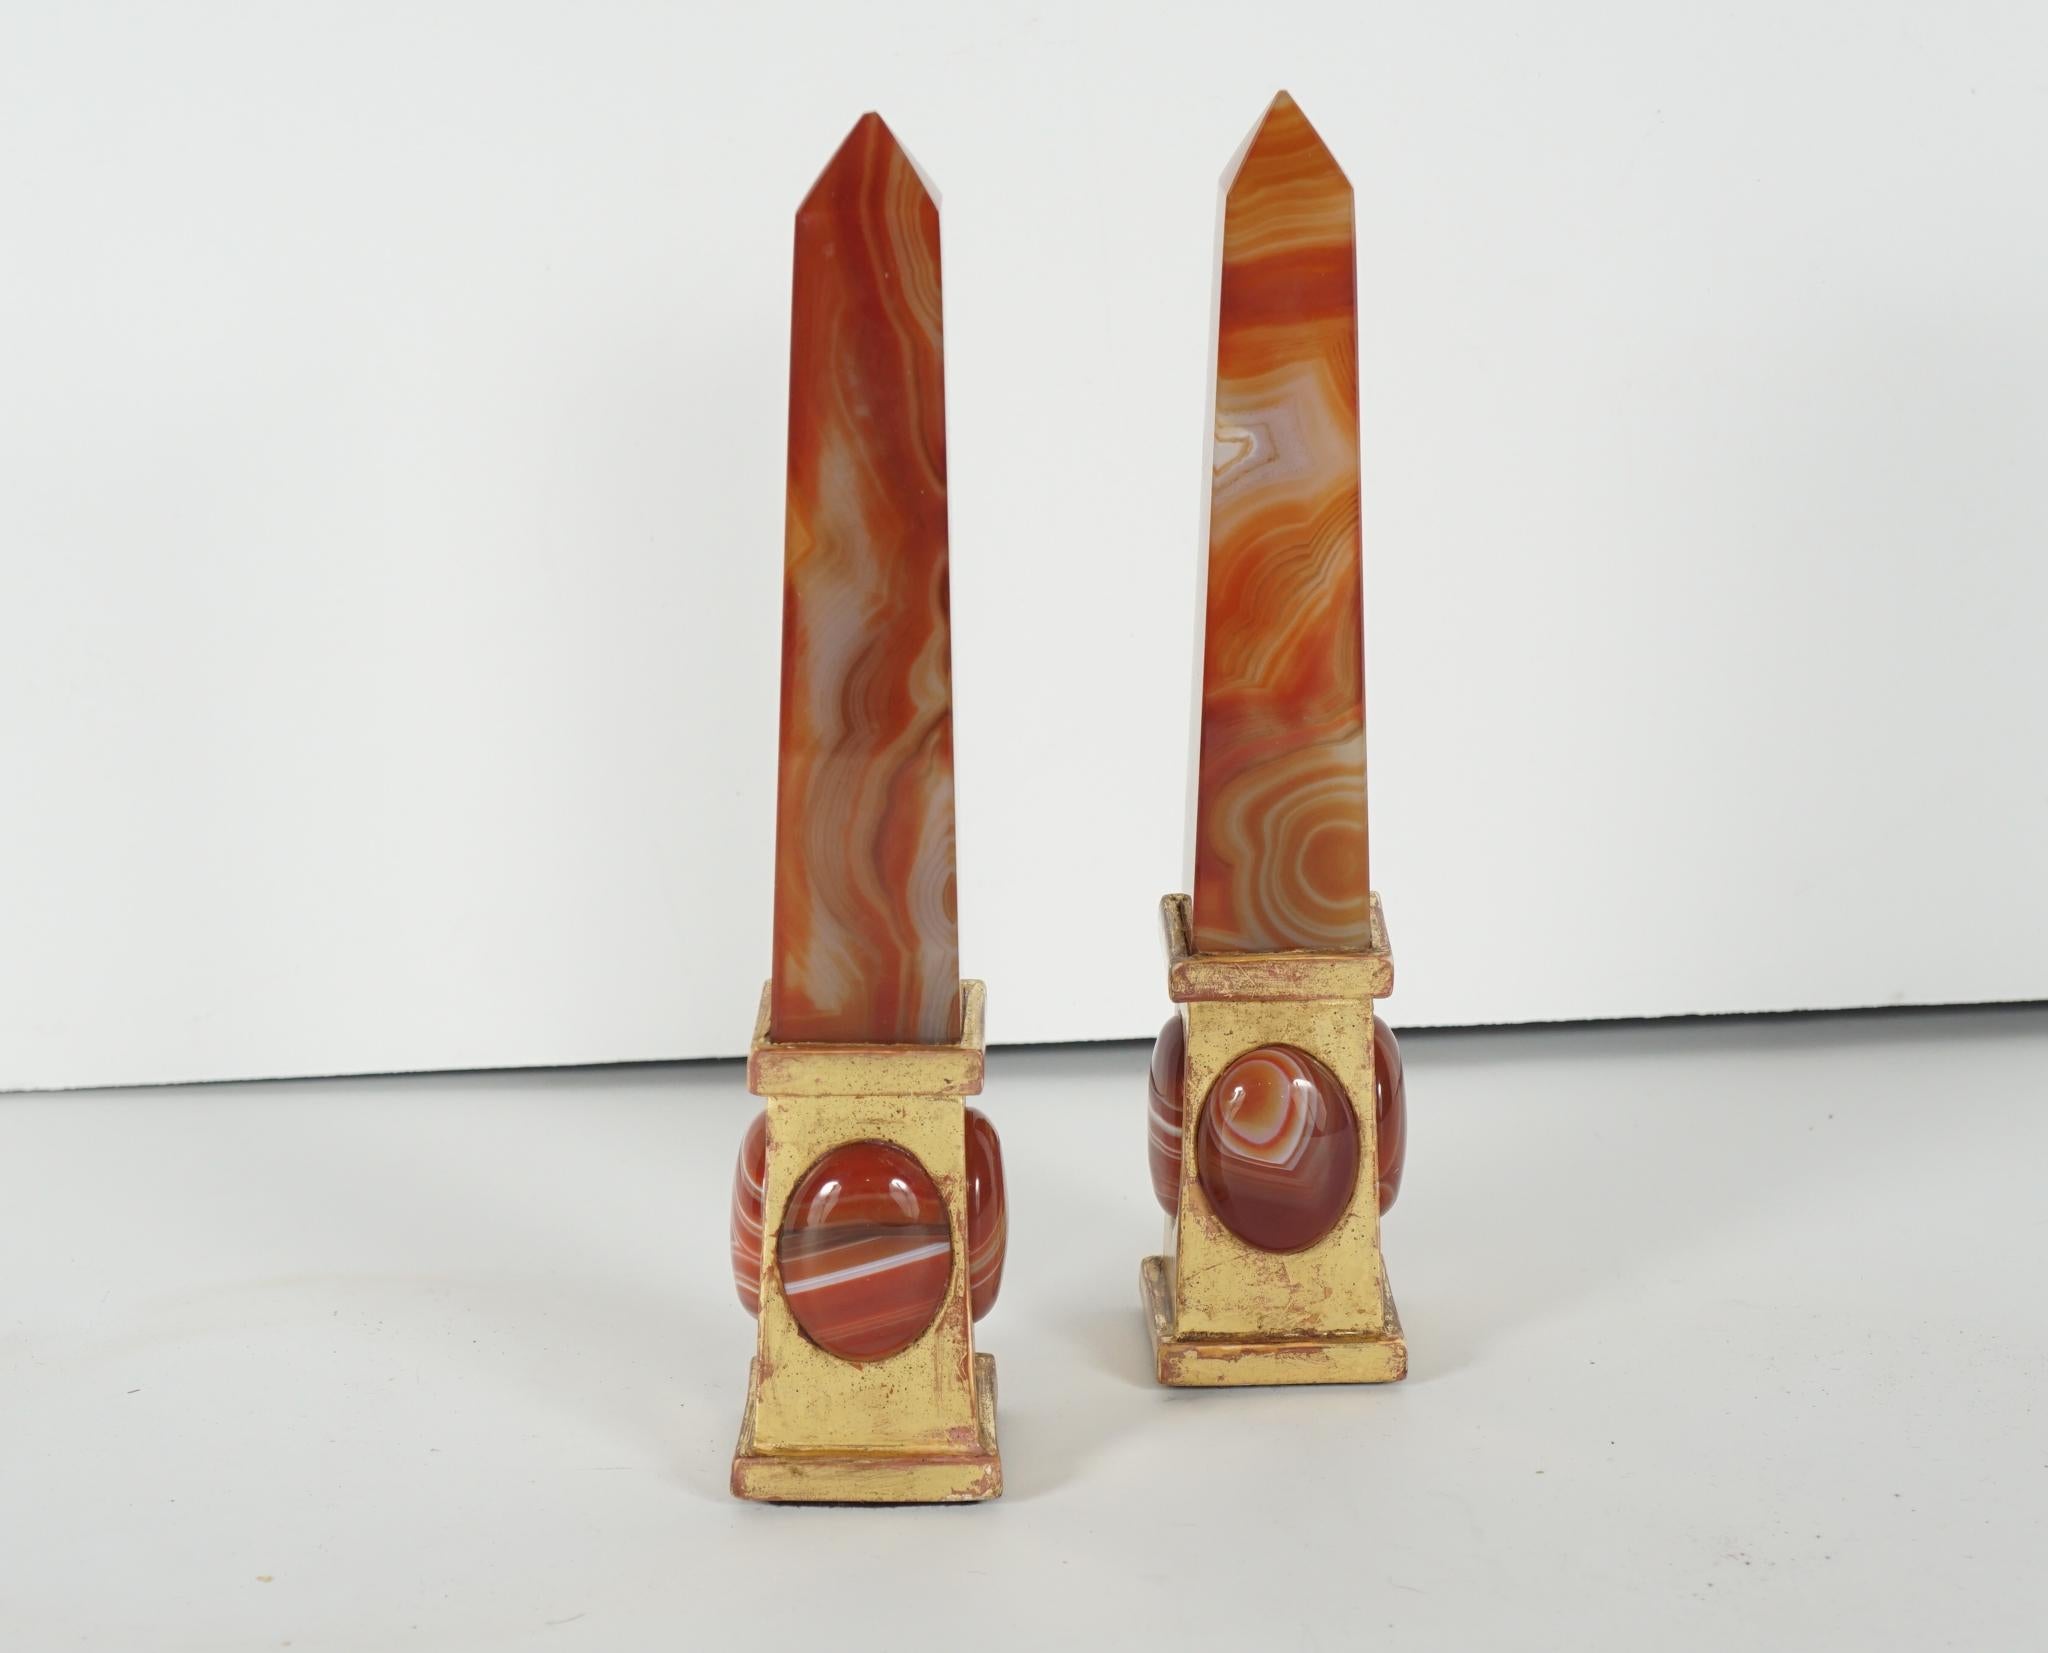 This very decorative pair of sardonyx obelisks are custom made and come from Rome The pair was made circa 1990 as part of a tabletop decorative scheme that included other hard stone obelisks and vases. The hardstone is set into carved and water